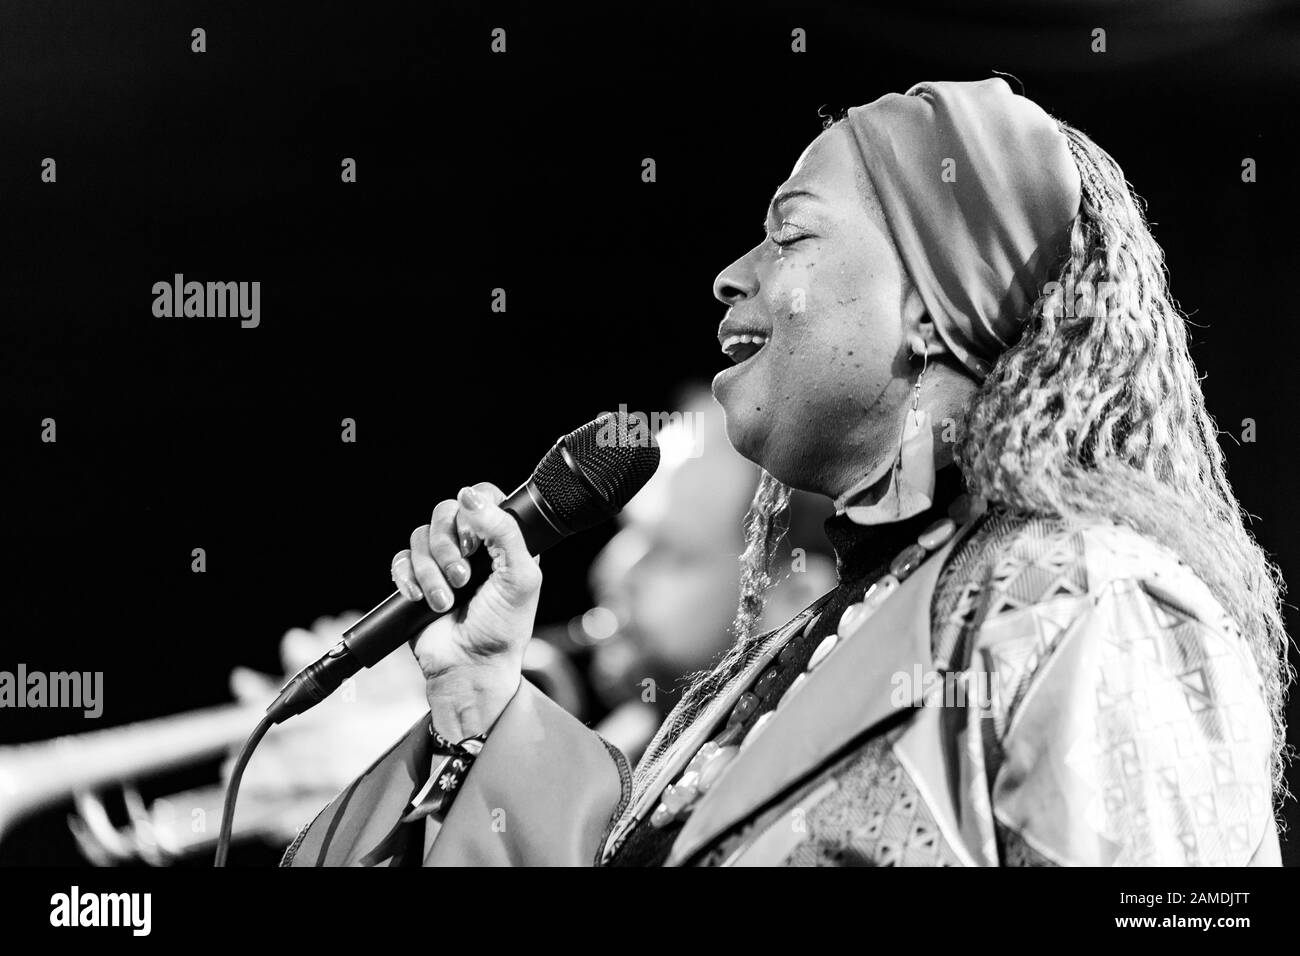 New York, NY - January 12, 2020: Joan Belgrave performs during From Detroit to the World concert celebrating Marcus Belgrave as part of Winter Jazz Festival at (le) Poisson Rouge Stock Photo